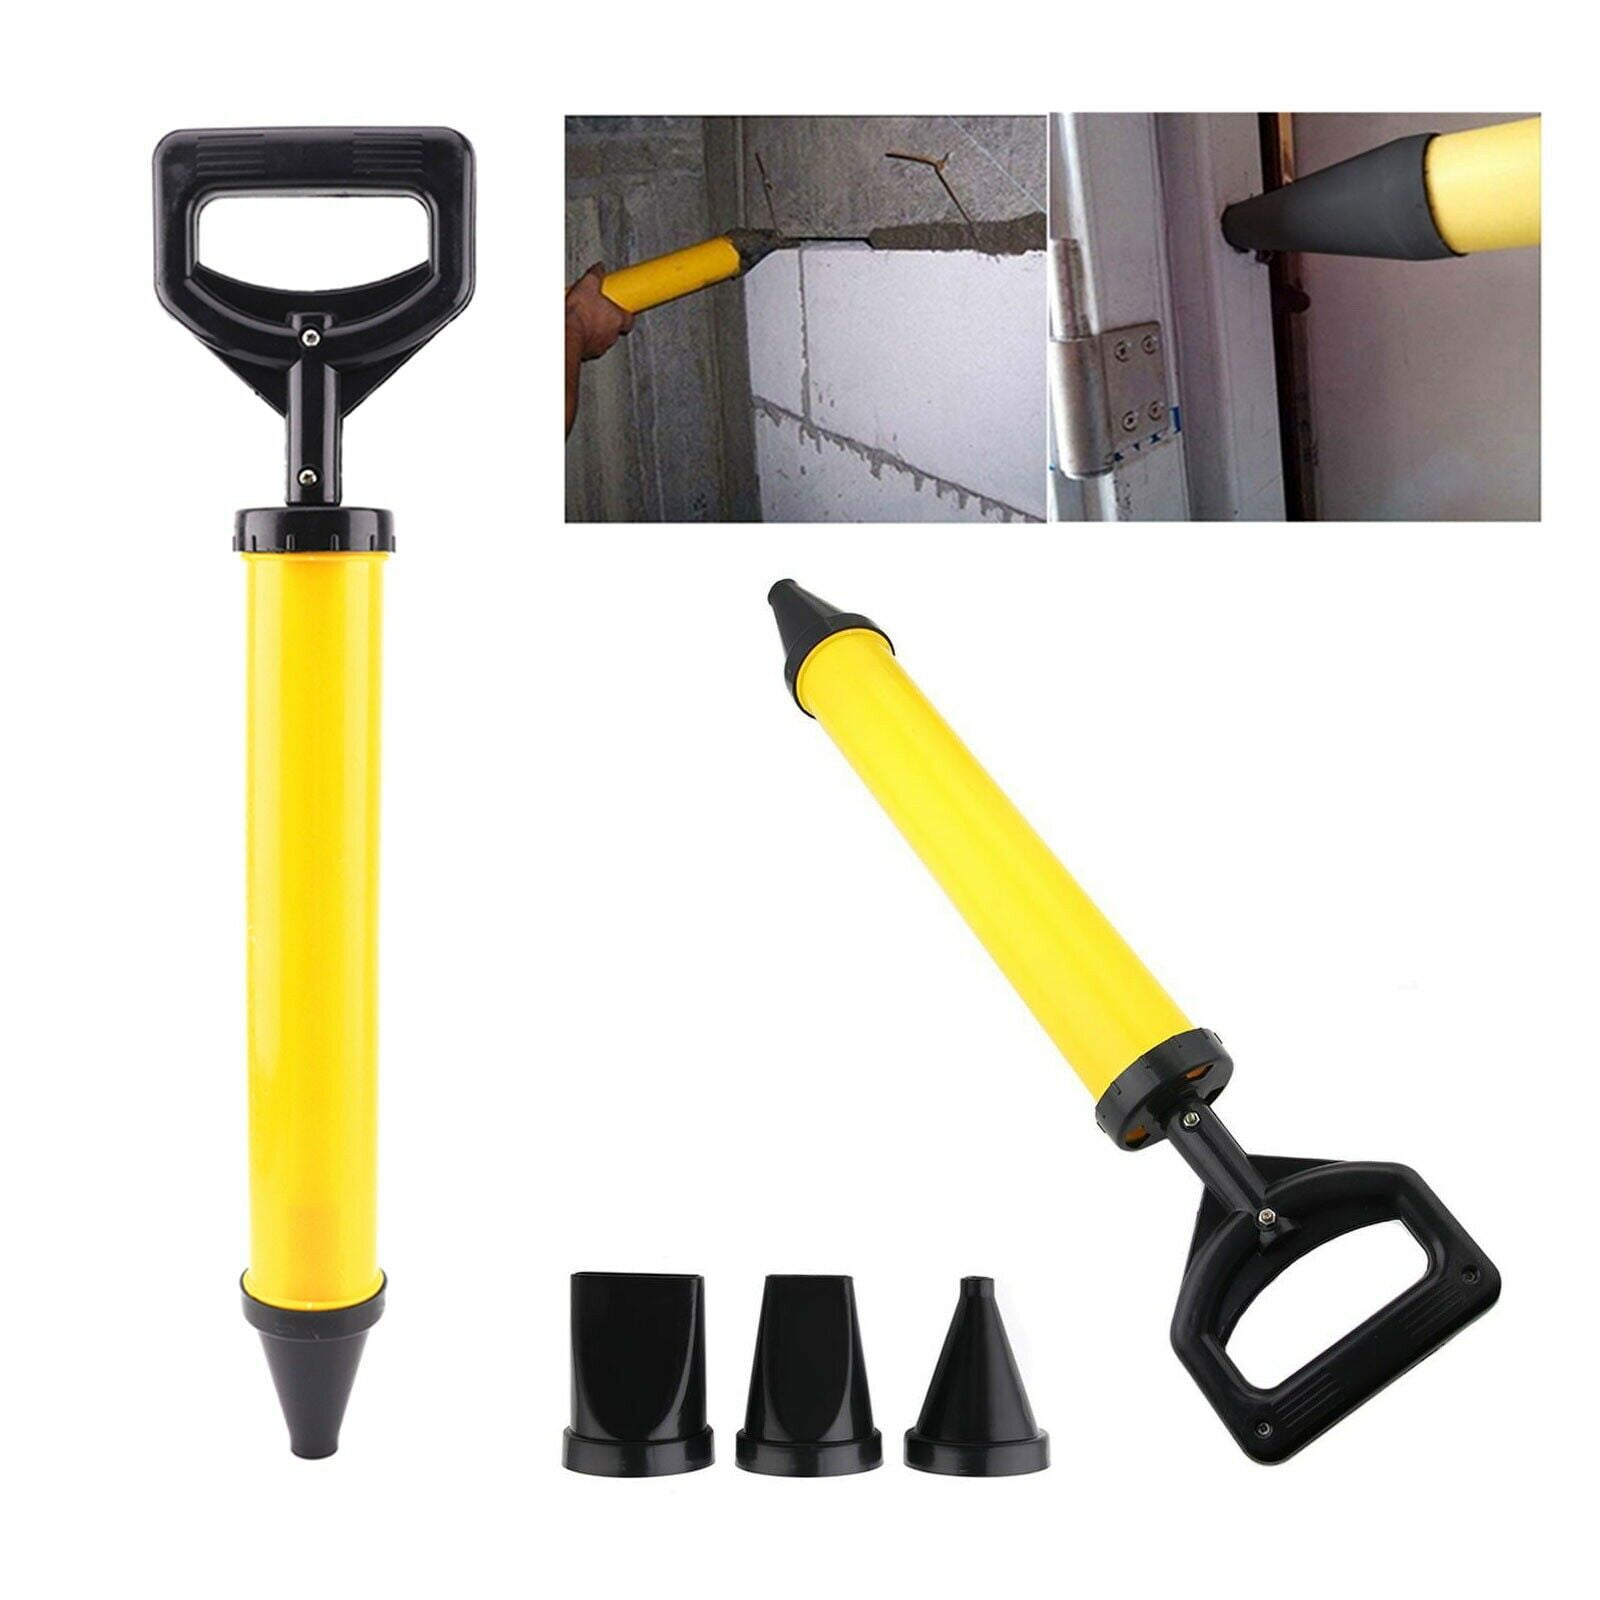 Mortar Gun for Brick Pointing Grouting Cement Lime Applicator Tool w 4 Nozzles 